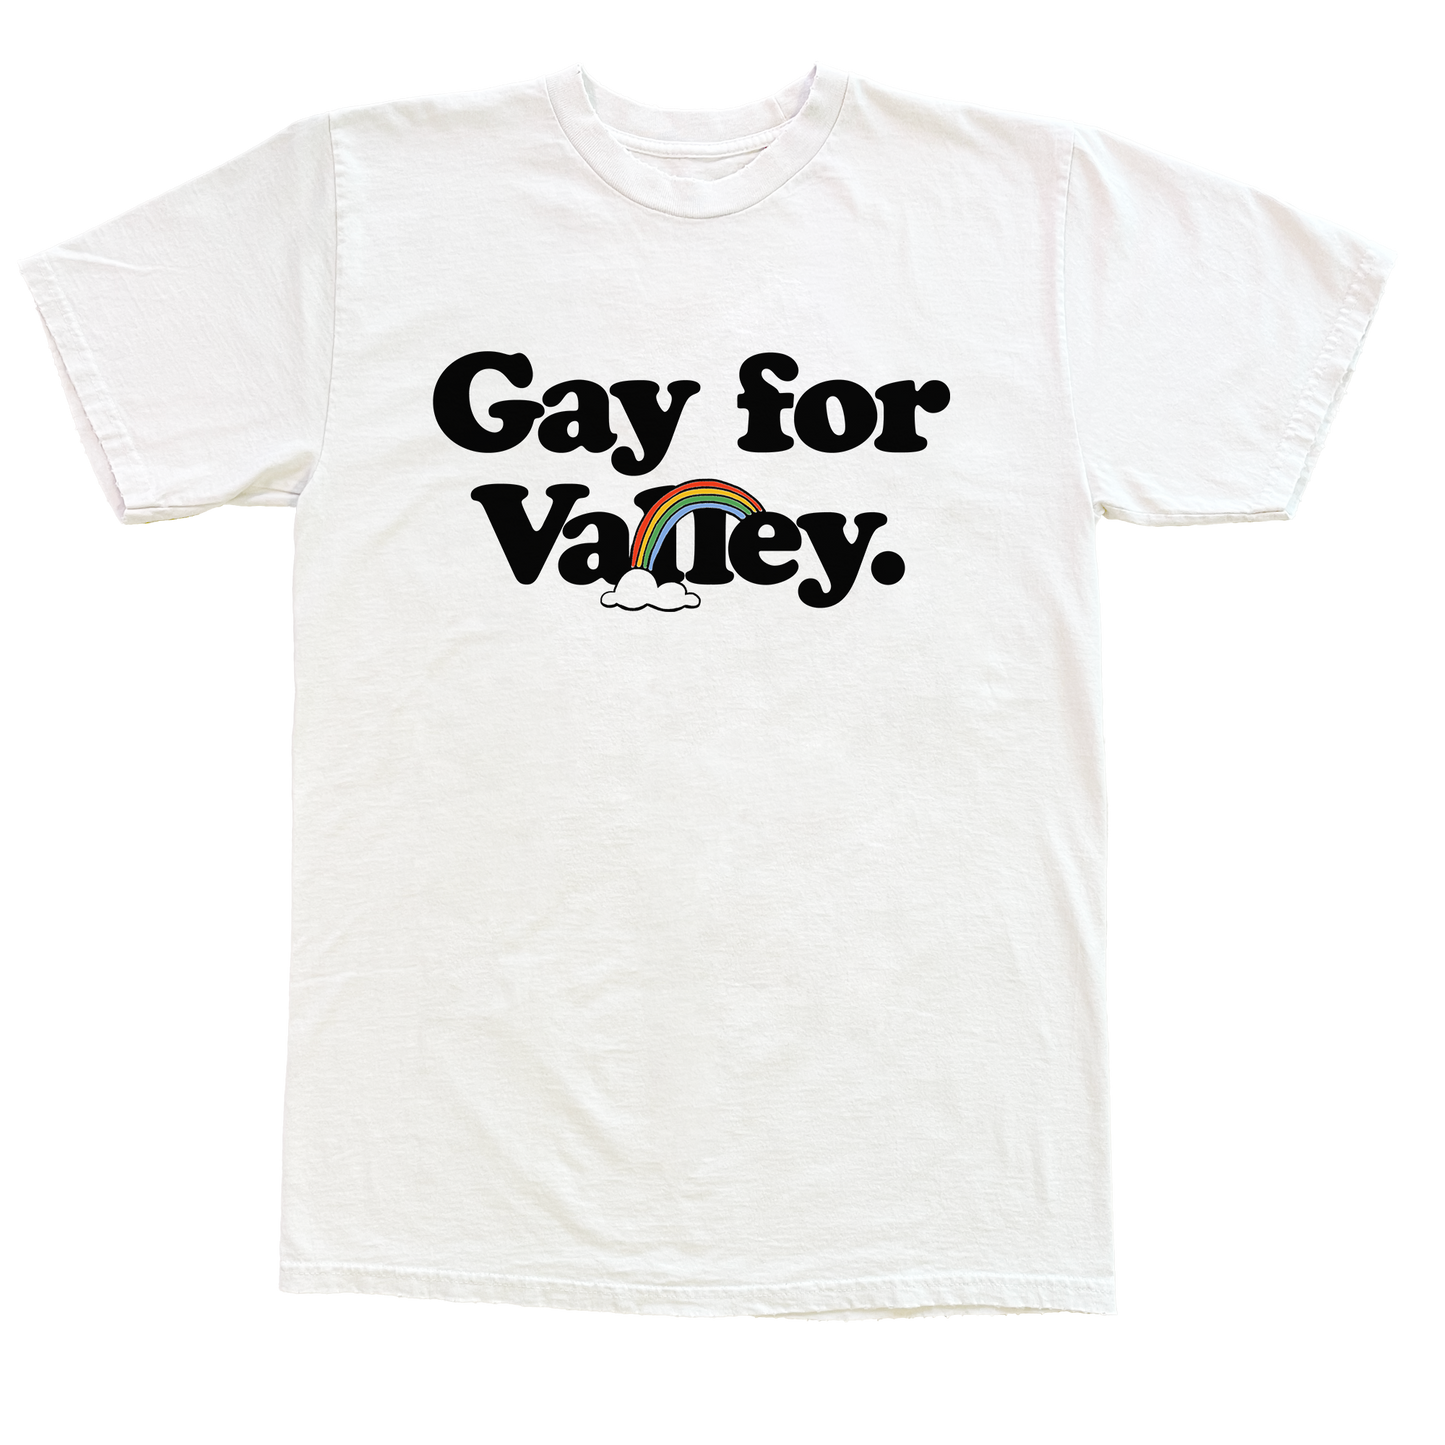 "Gay for Valley" Tee